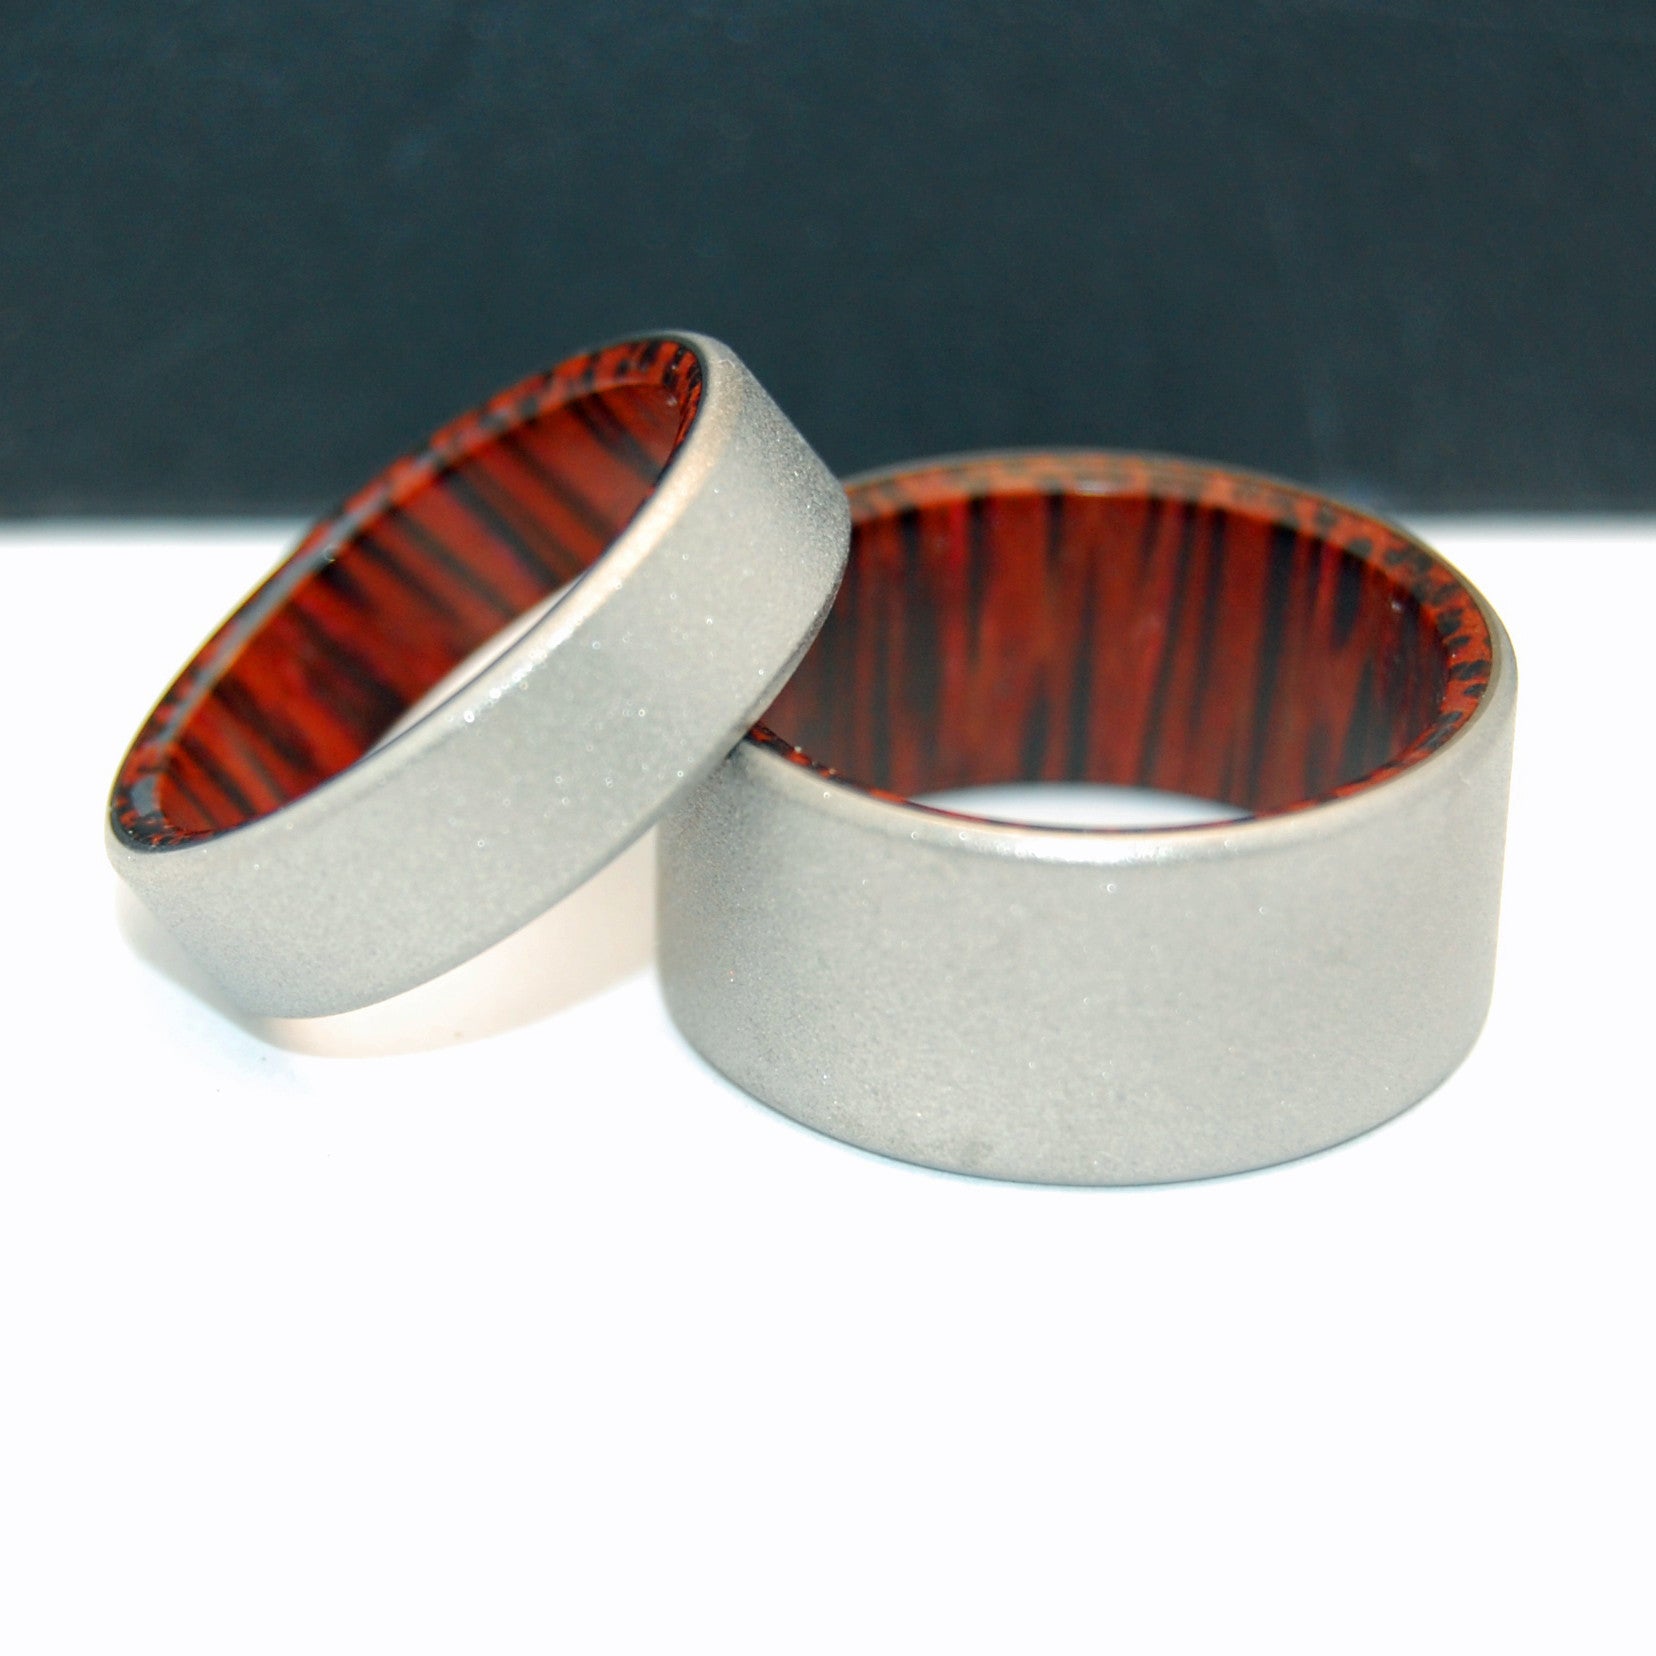 TALES OF EDEN | Red Palm Wood & Titanium - Unique Wedding Rings - Wedding Rings Set - Minter and Richter Designs